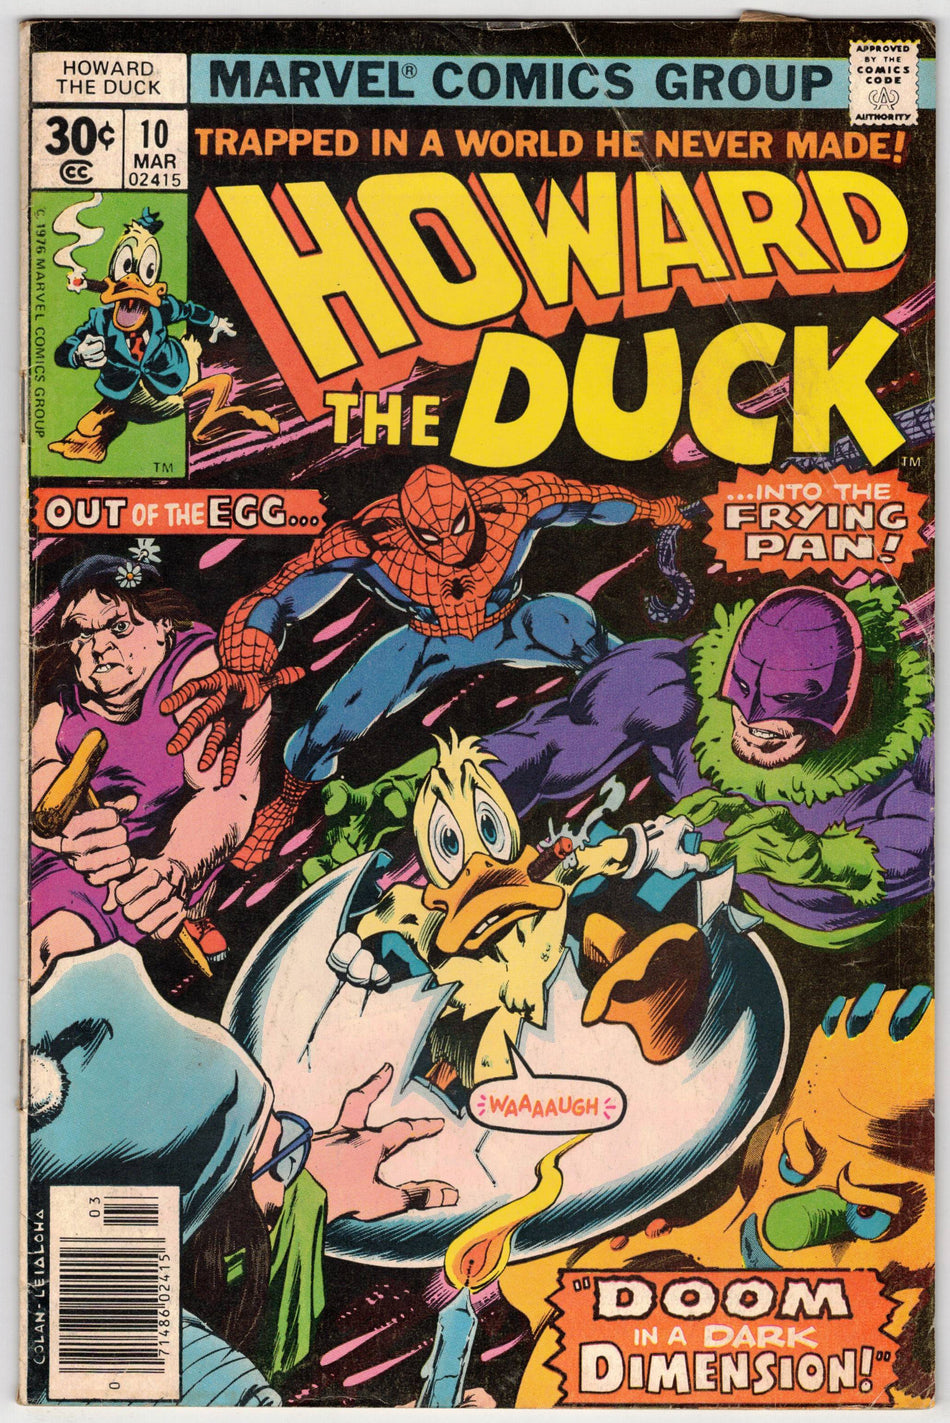 Photo of Howard the Duck, Vol. 1 (1976) Issue 10 - Very Good Comic sold by Stronghold Collectibles